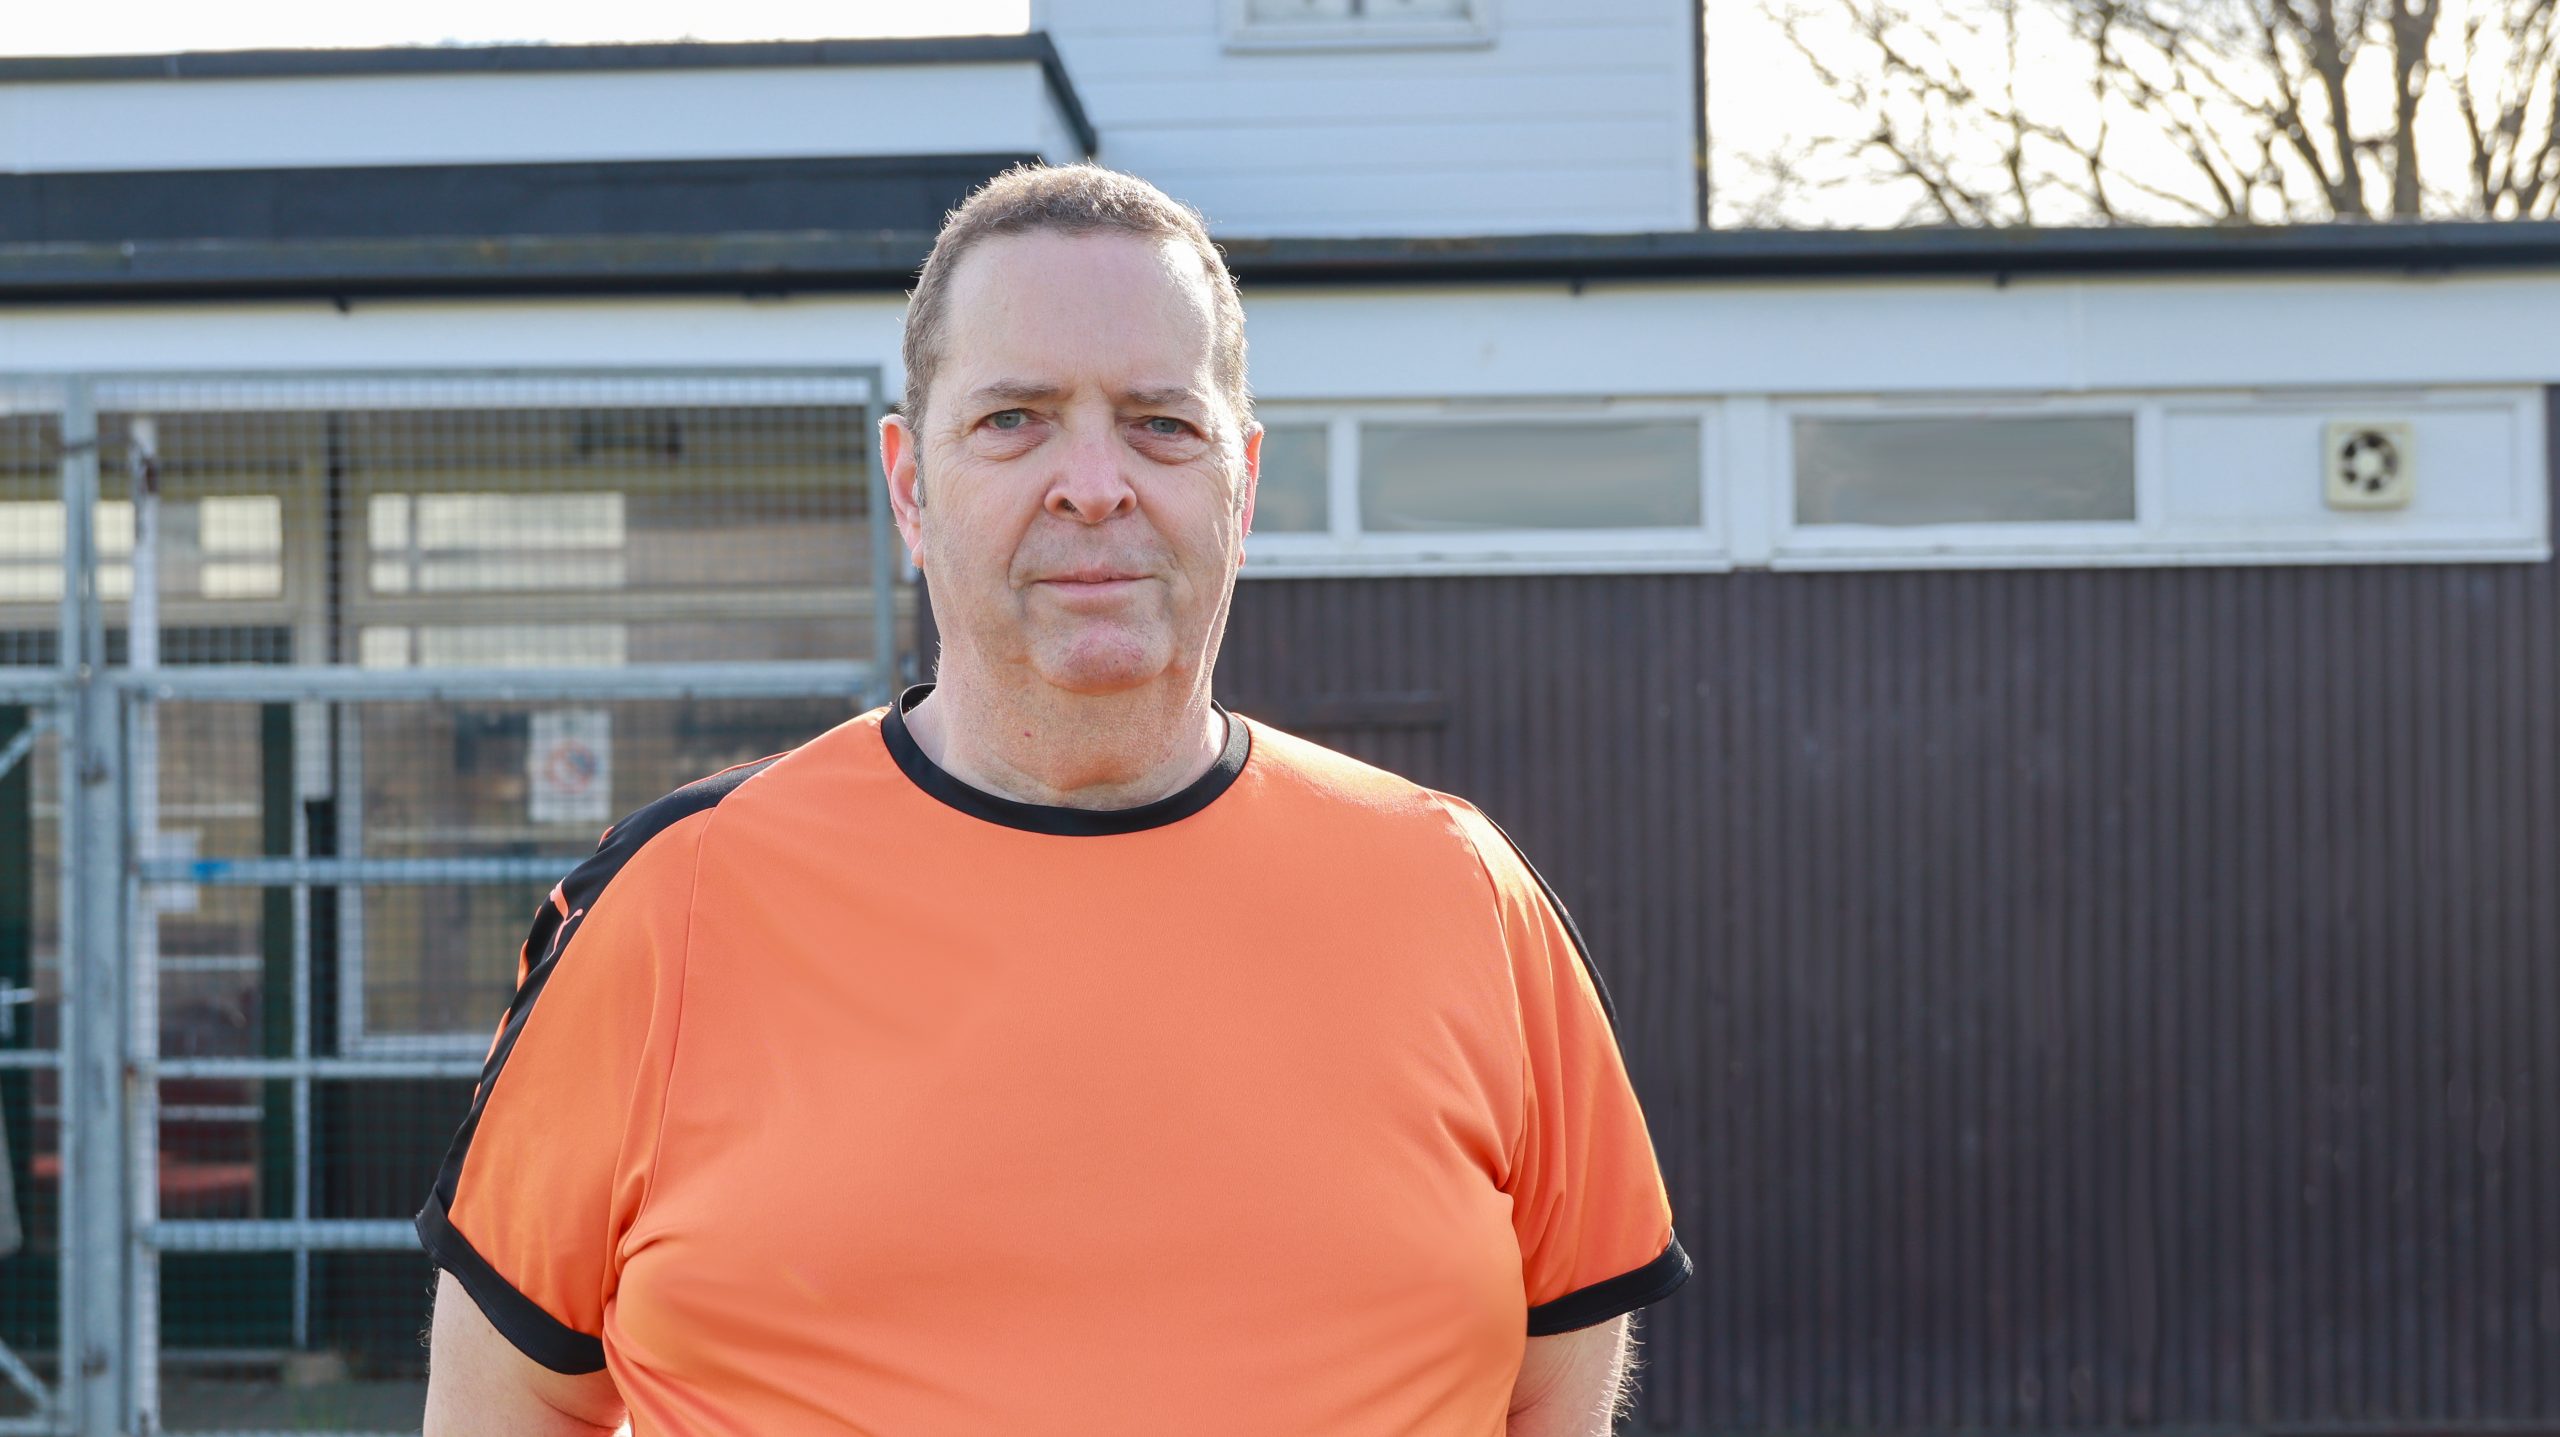 &#8220;These people really do care&#8221; &#8211; How Brighter Outlook helped Mike through cancer treatment